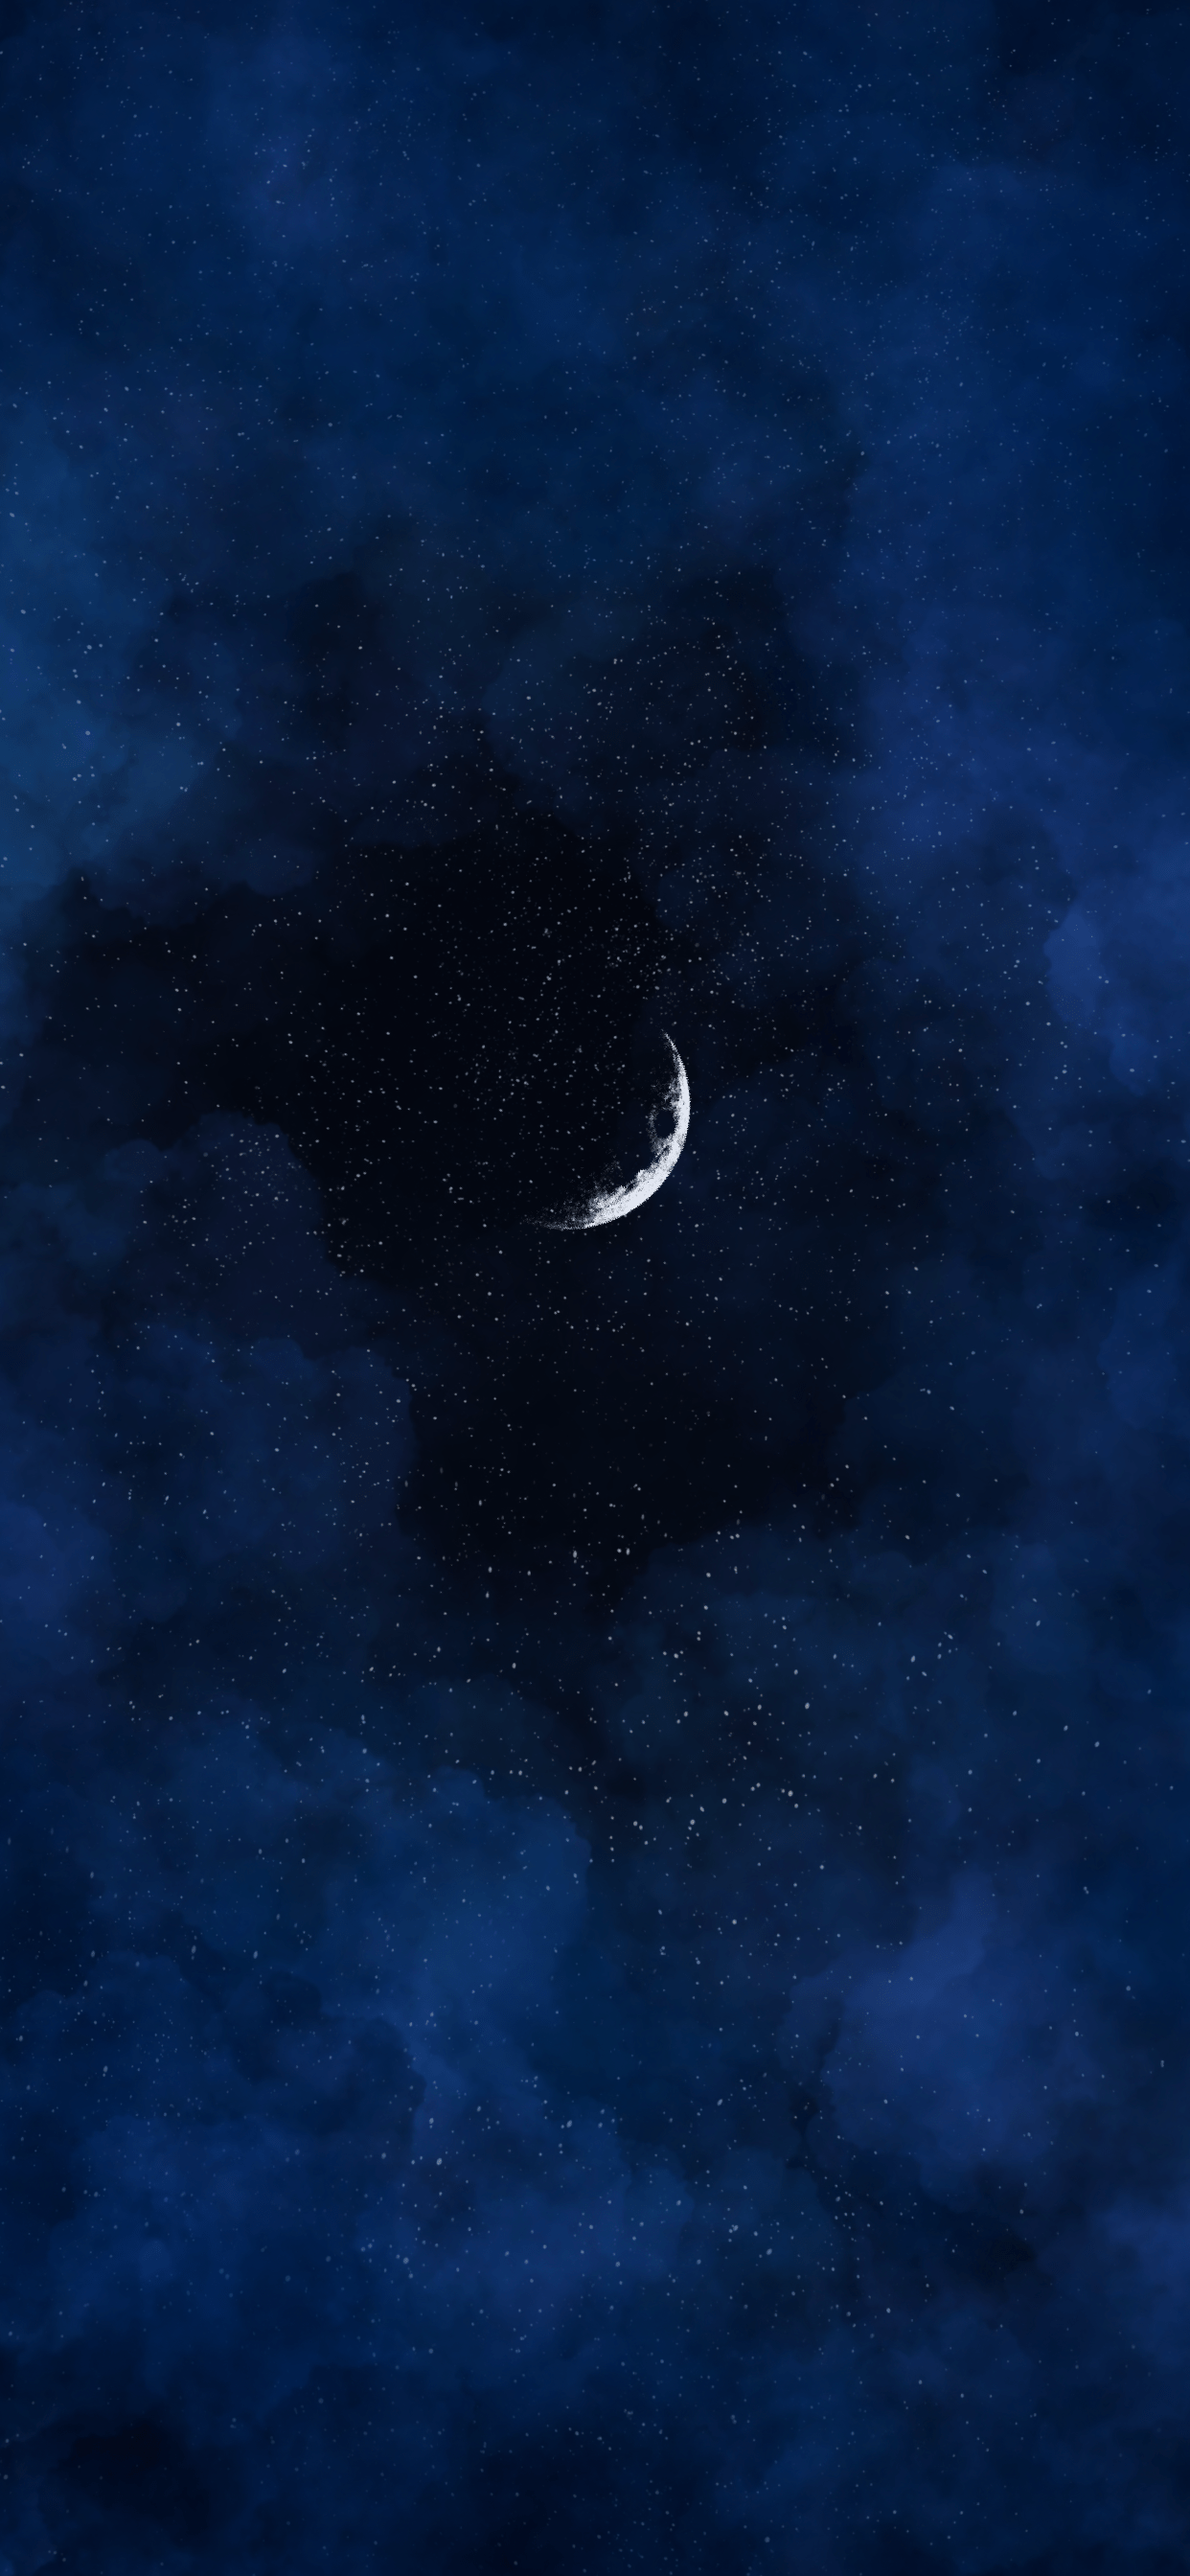 A crescent moon and stars in a dark blue sky - Moon